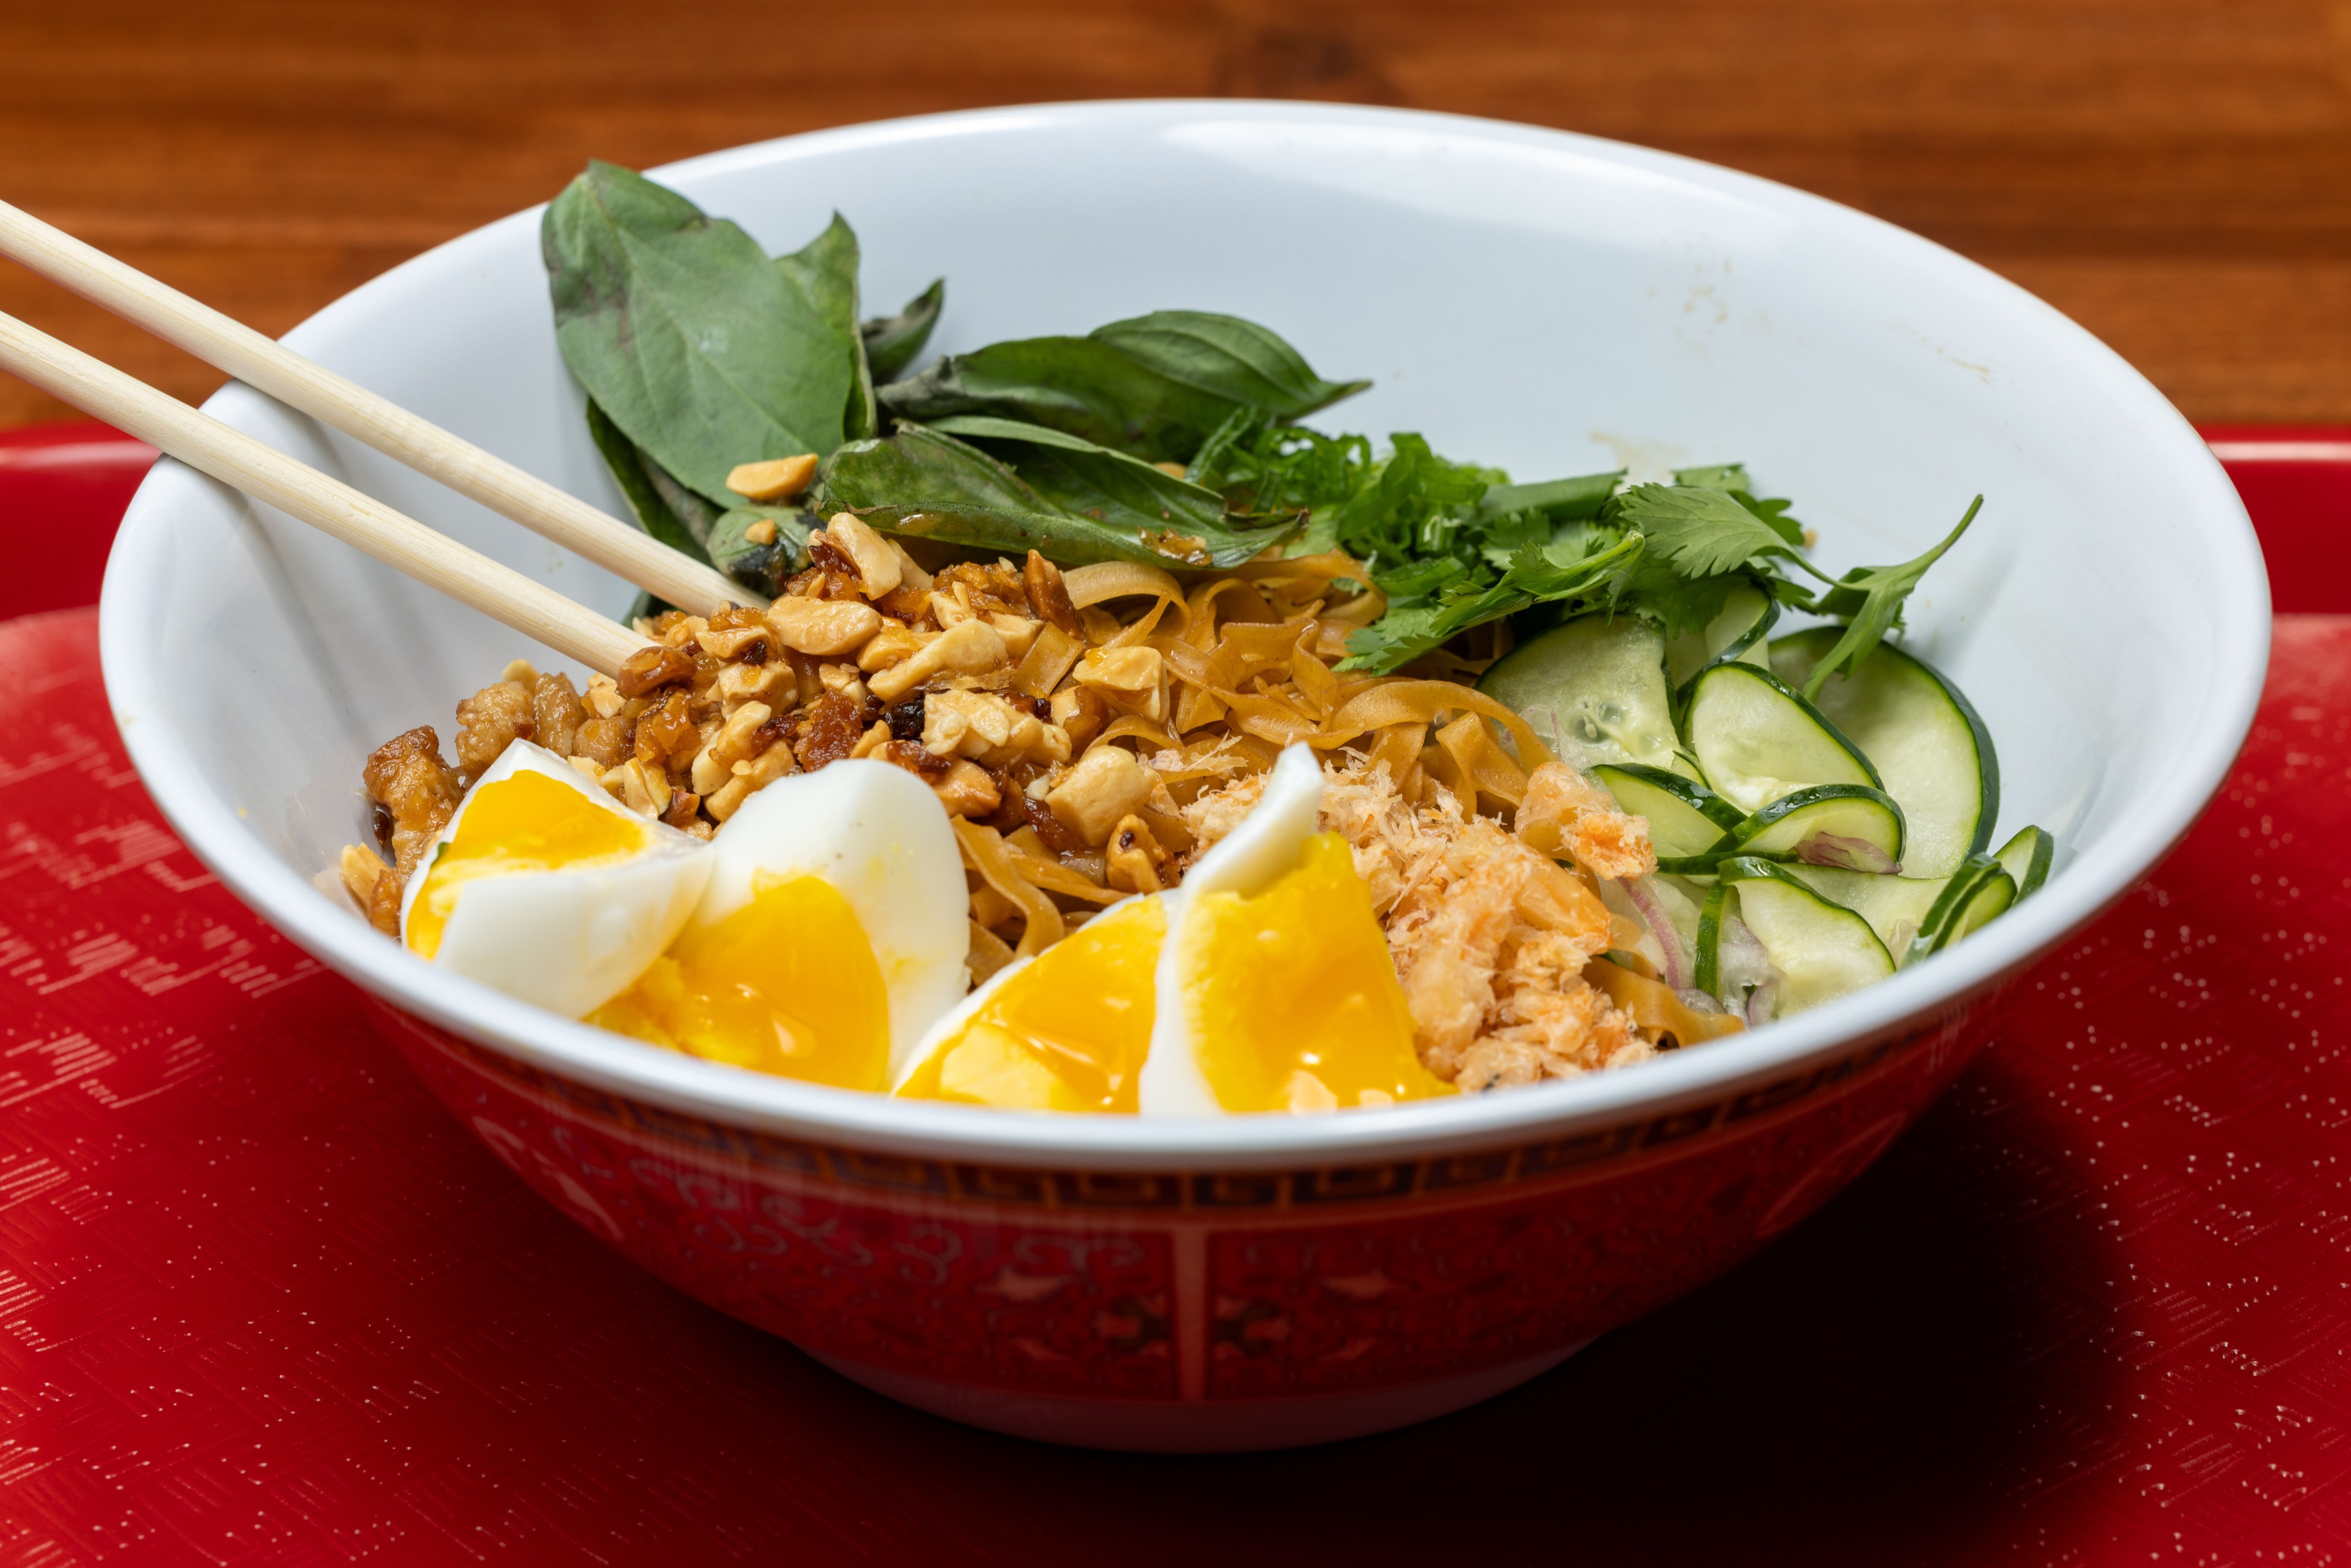 A white bowl filled with hard boiled eggs, noodles, peanuts, and fresh herbs on a red tray.